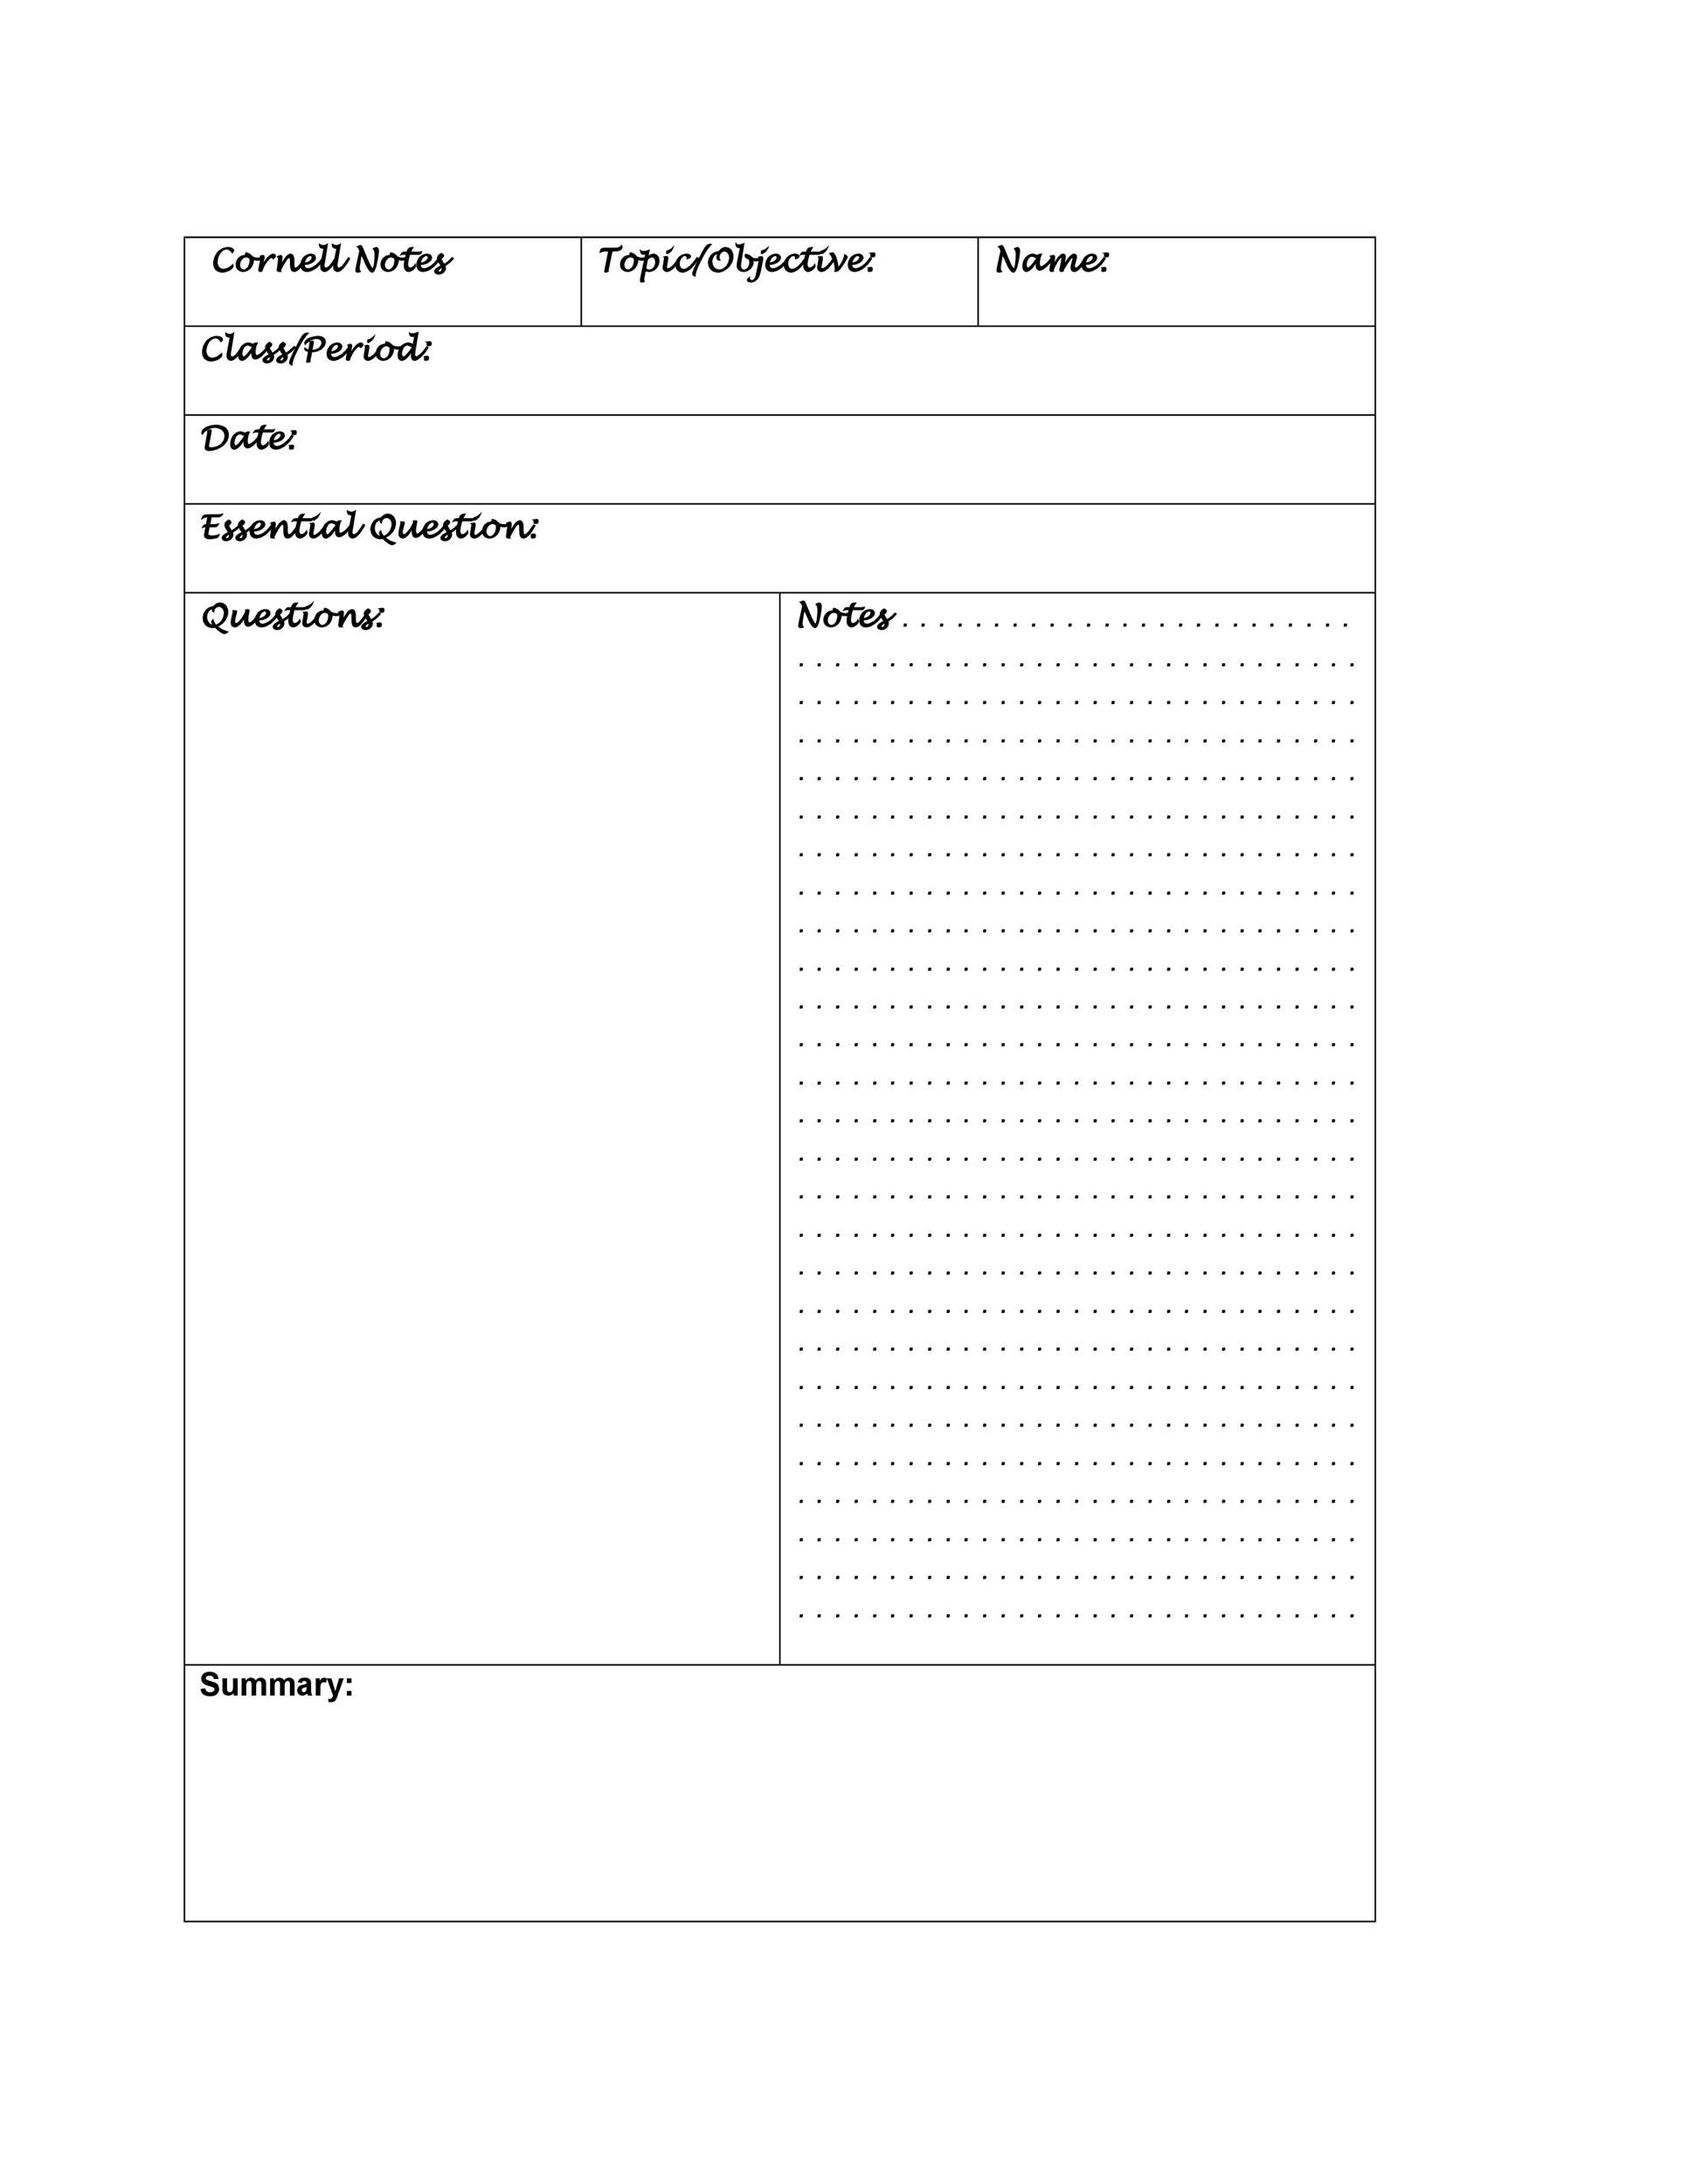 Cornell Notes Template Download Microsoft Word DocTemplates